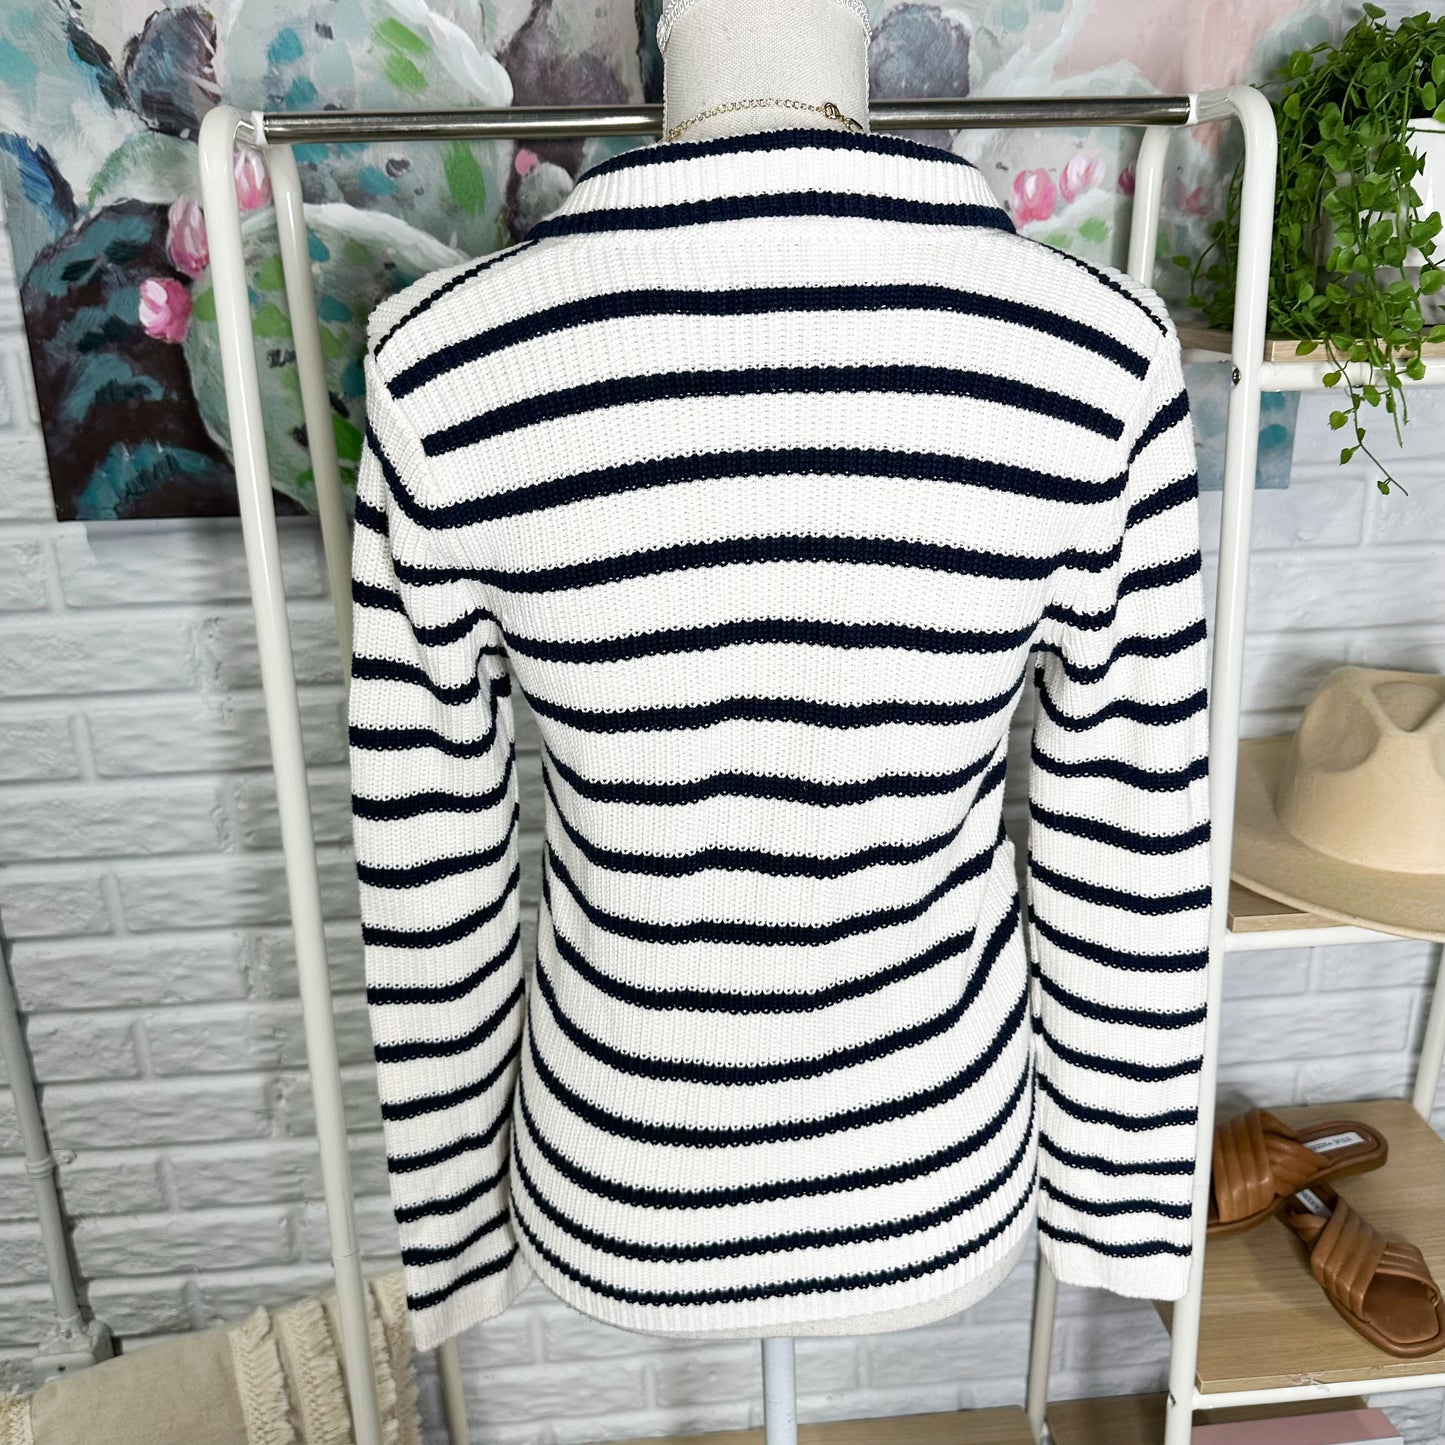 LOFT New Striped Ribbed Double Breasted Sweater Jacket Size Small